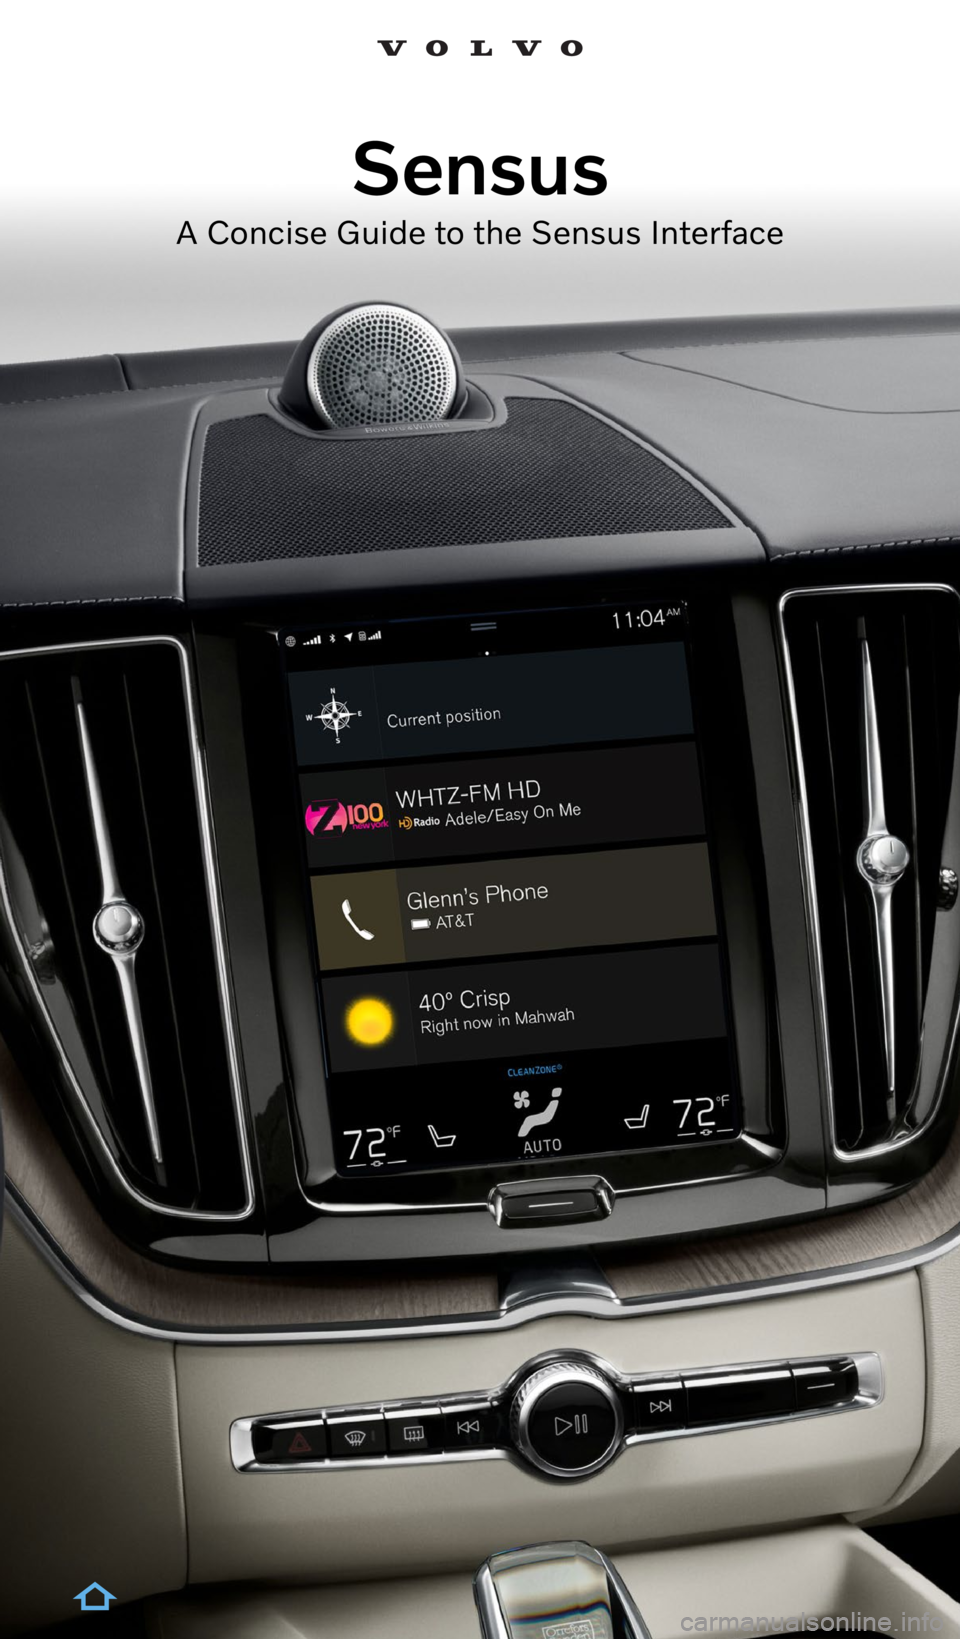 VOLVO S60 RECHARGE 2022  Sensus Digital Guide Sensus
A Concise Guide to the Sensus Interface  